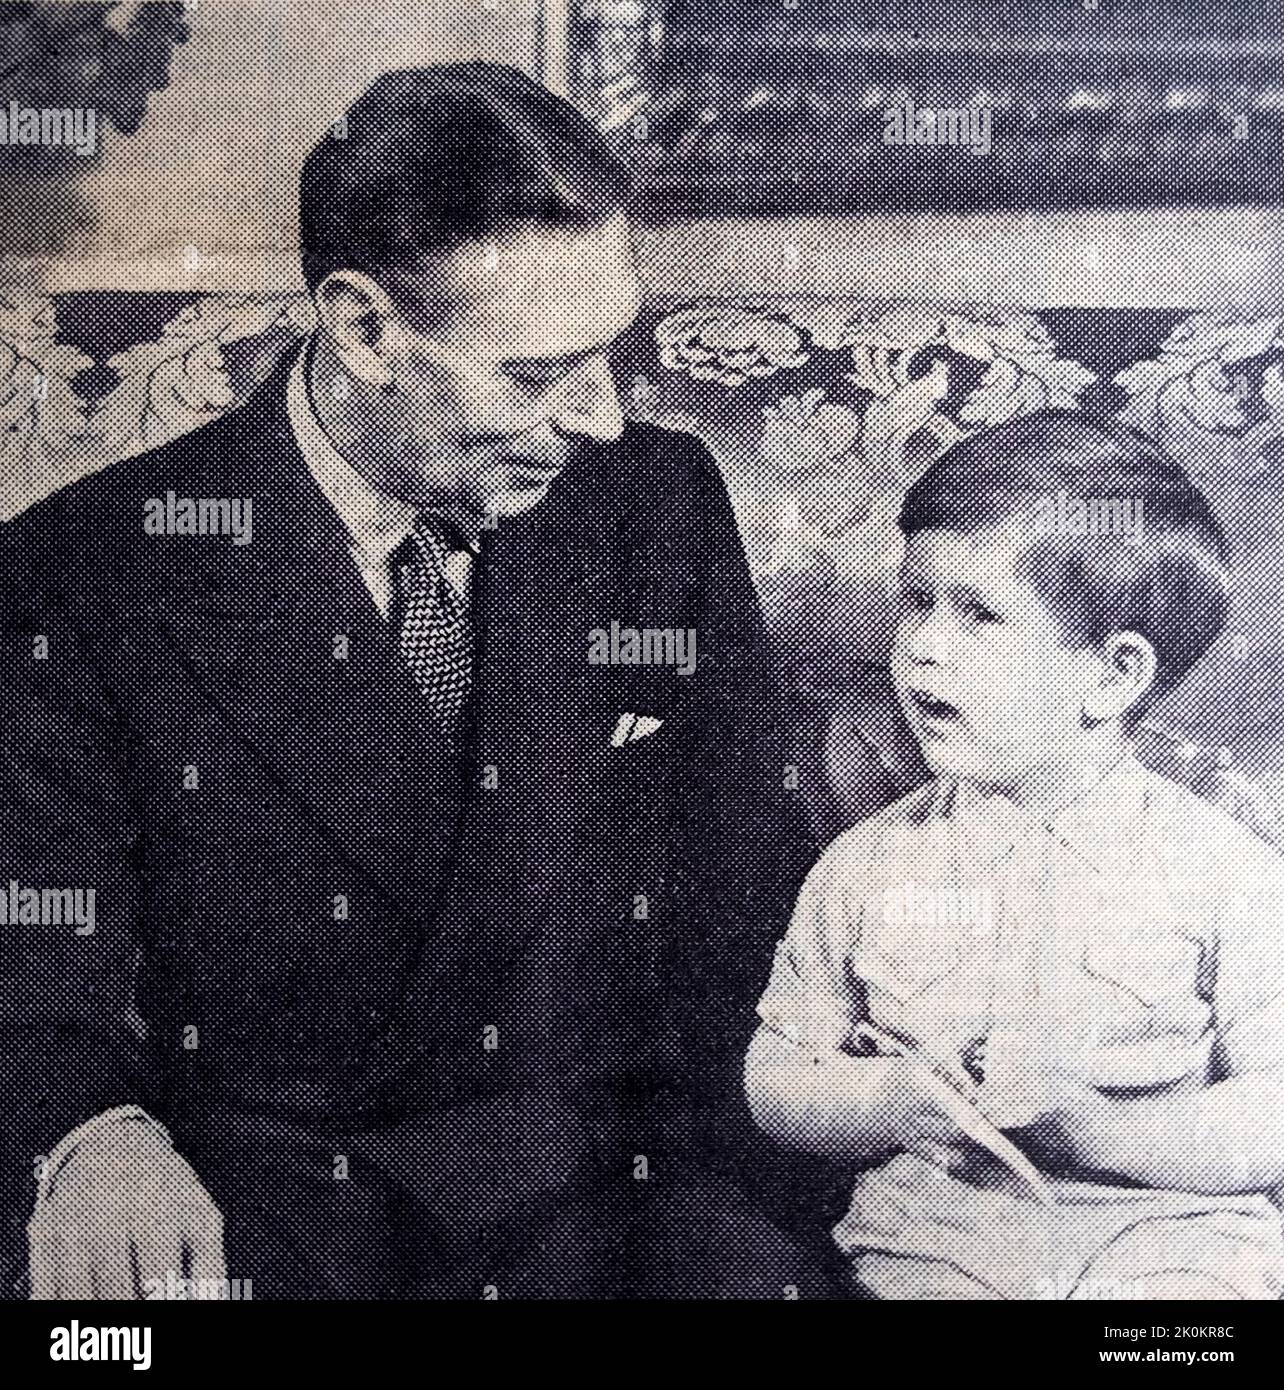 King George VI talking to Prince Charles child boy age 3 (now King Charles III) portrait 1951 in The Times newspaper London England UK Stock Photo